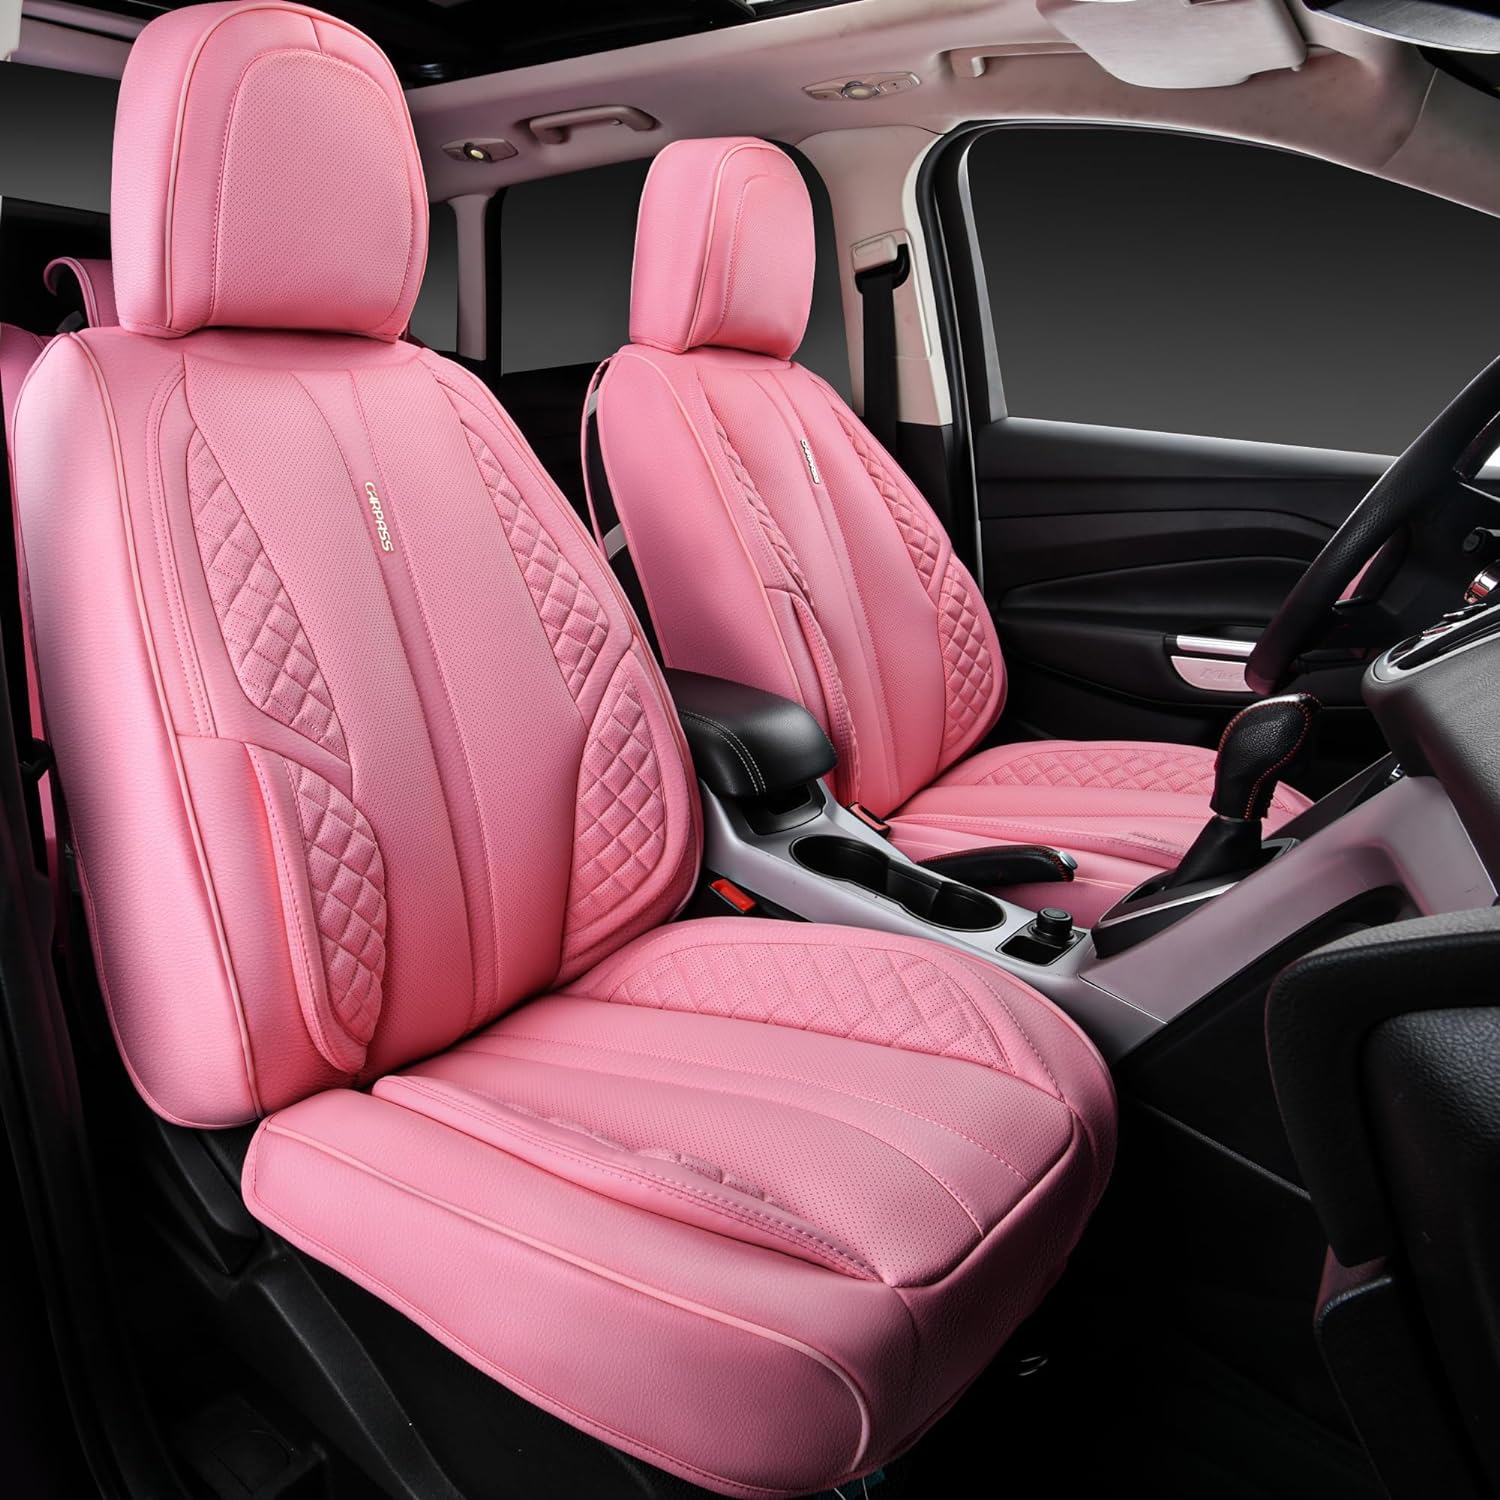 CAR PASS Nappa Pink Leather Car Seat Covers Full Set Cute for Women Waterproof Cushioned budle with 3D Waterproof Leather Car Floor Mats (Pink)